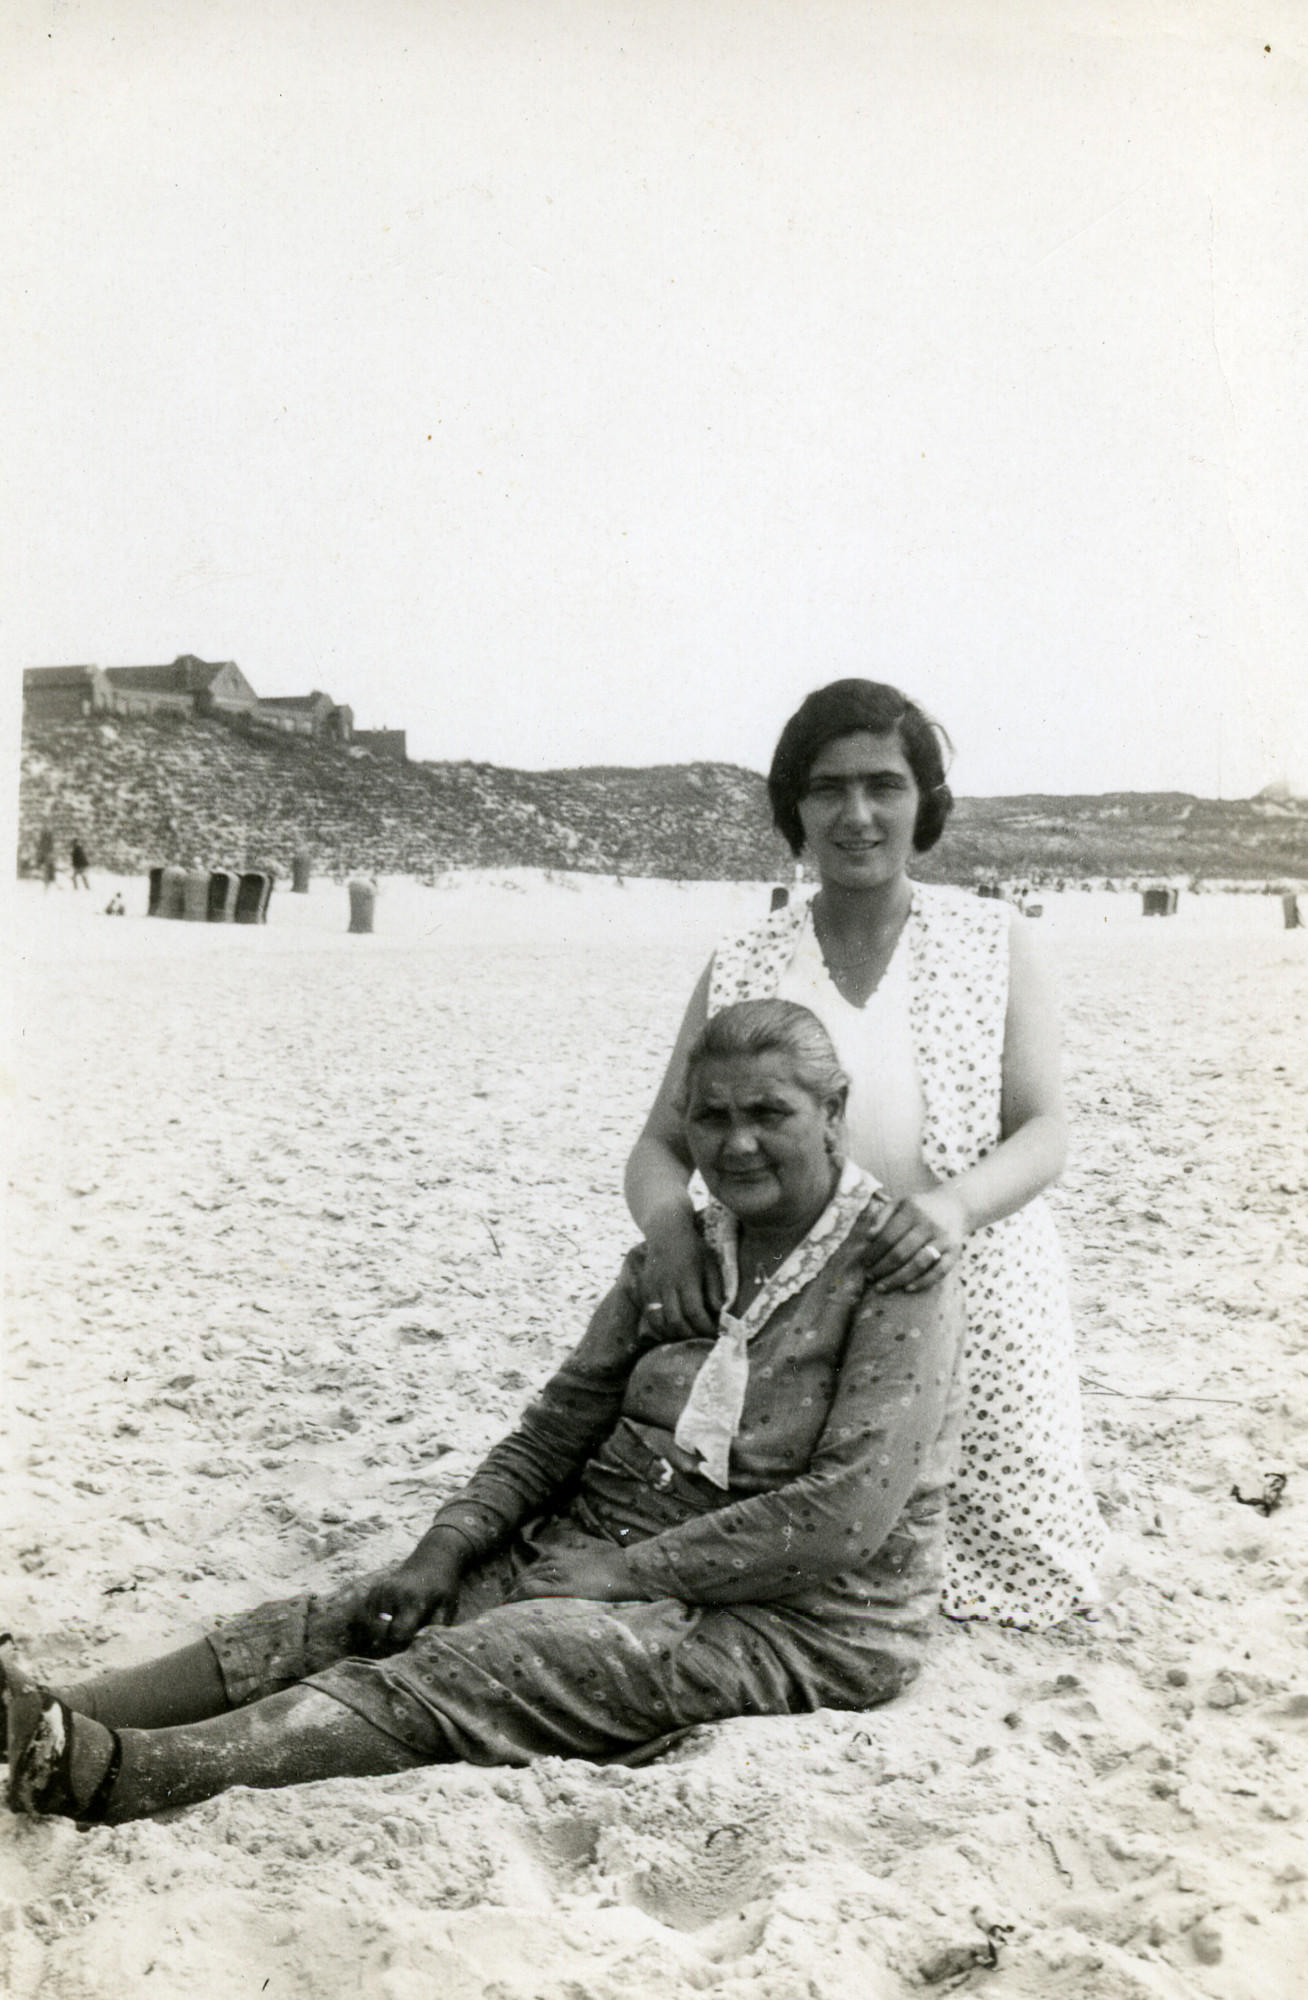 Trjntje de Jong and her daughter Schoontje (Shaina) relax on the beach.

Schoontje survived the Holocaust, but Trjntje perished.